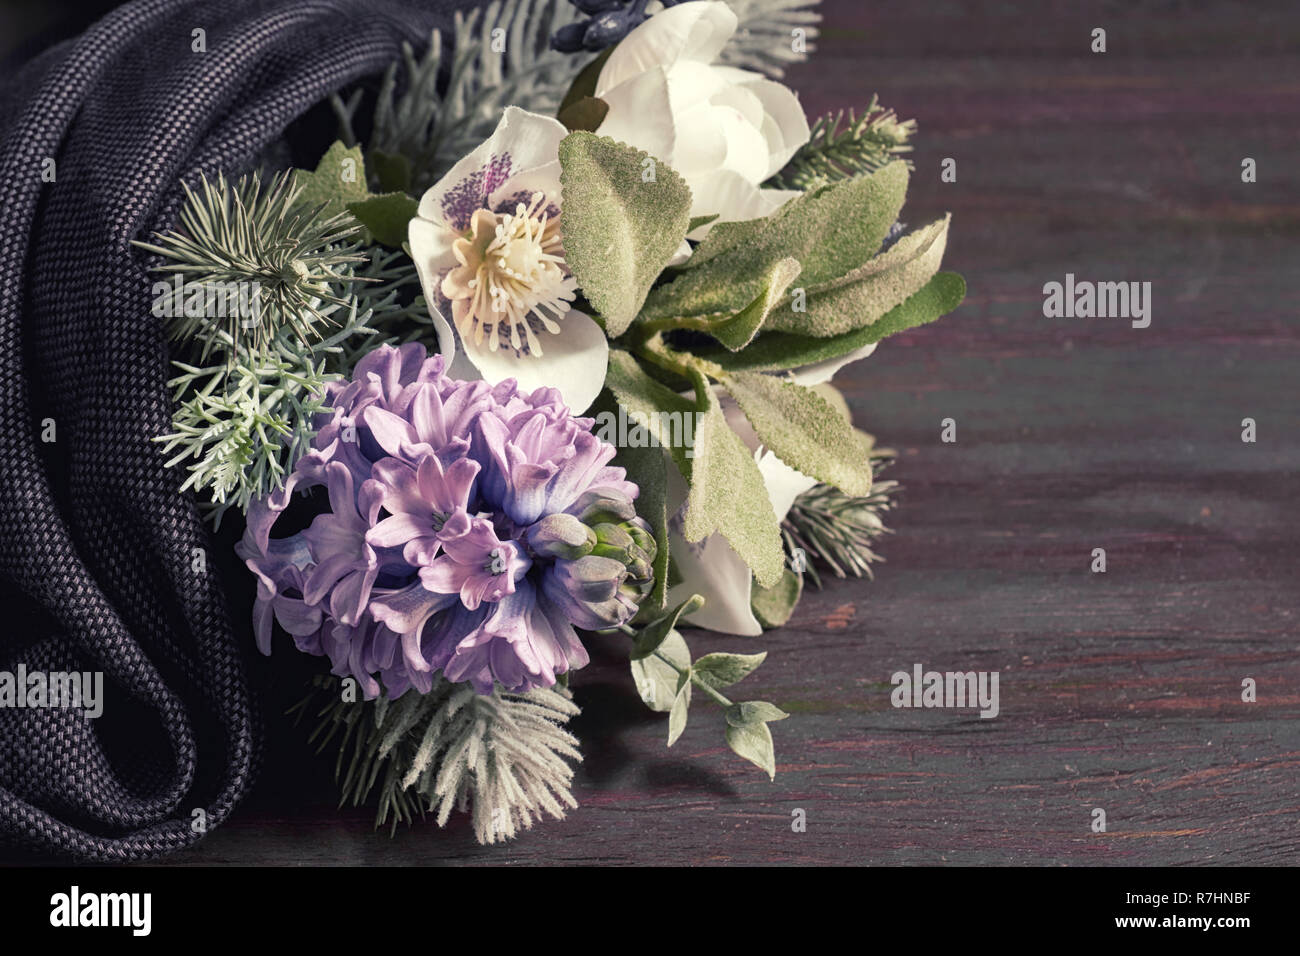 Winter decor. Flower bouquet in the winter style with blue hyacinth, white anemones and branches of christmas tree on dark wood covered with dark fabr Stock Photo